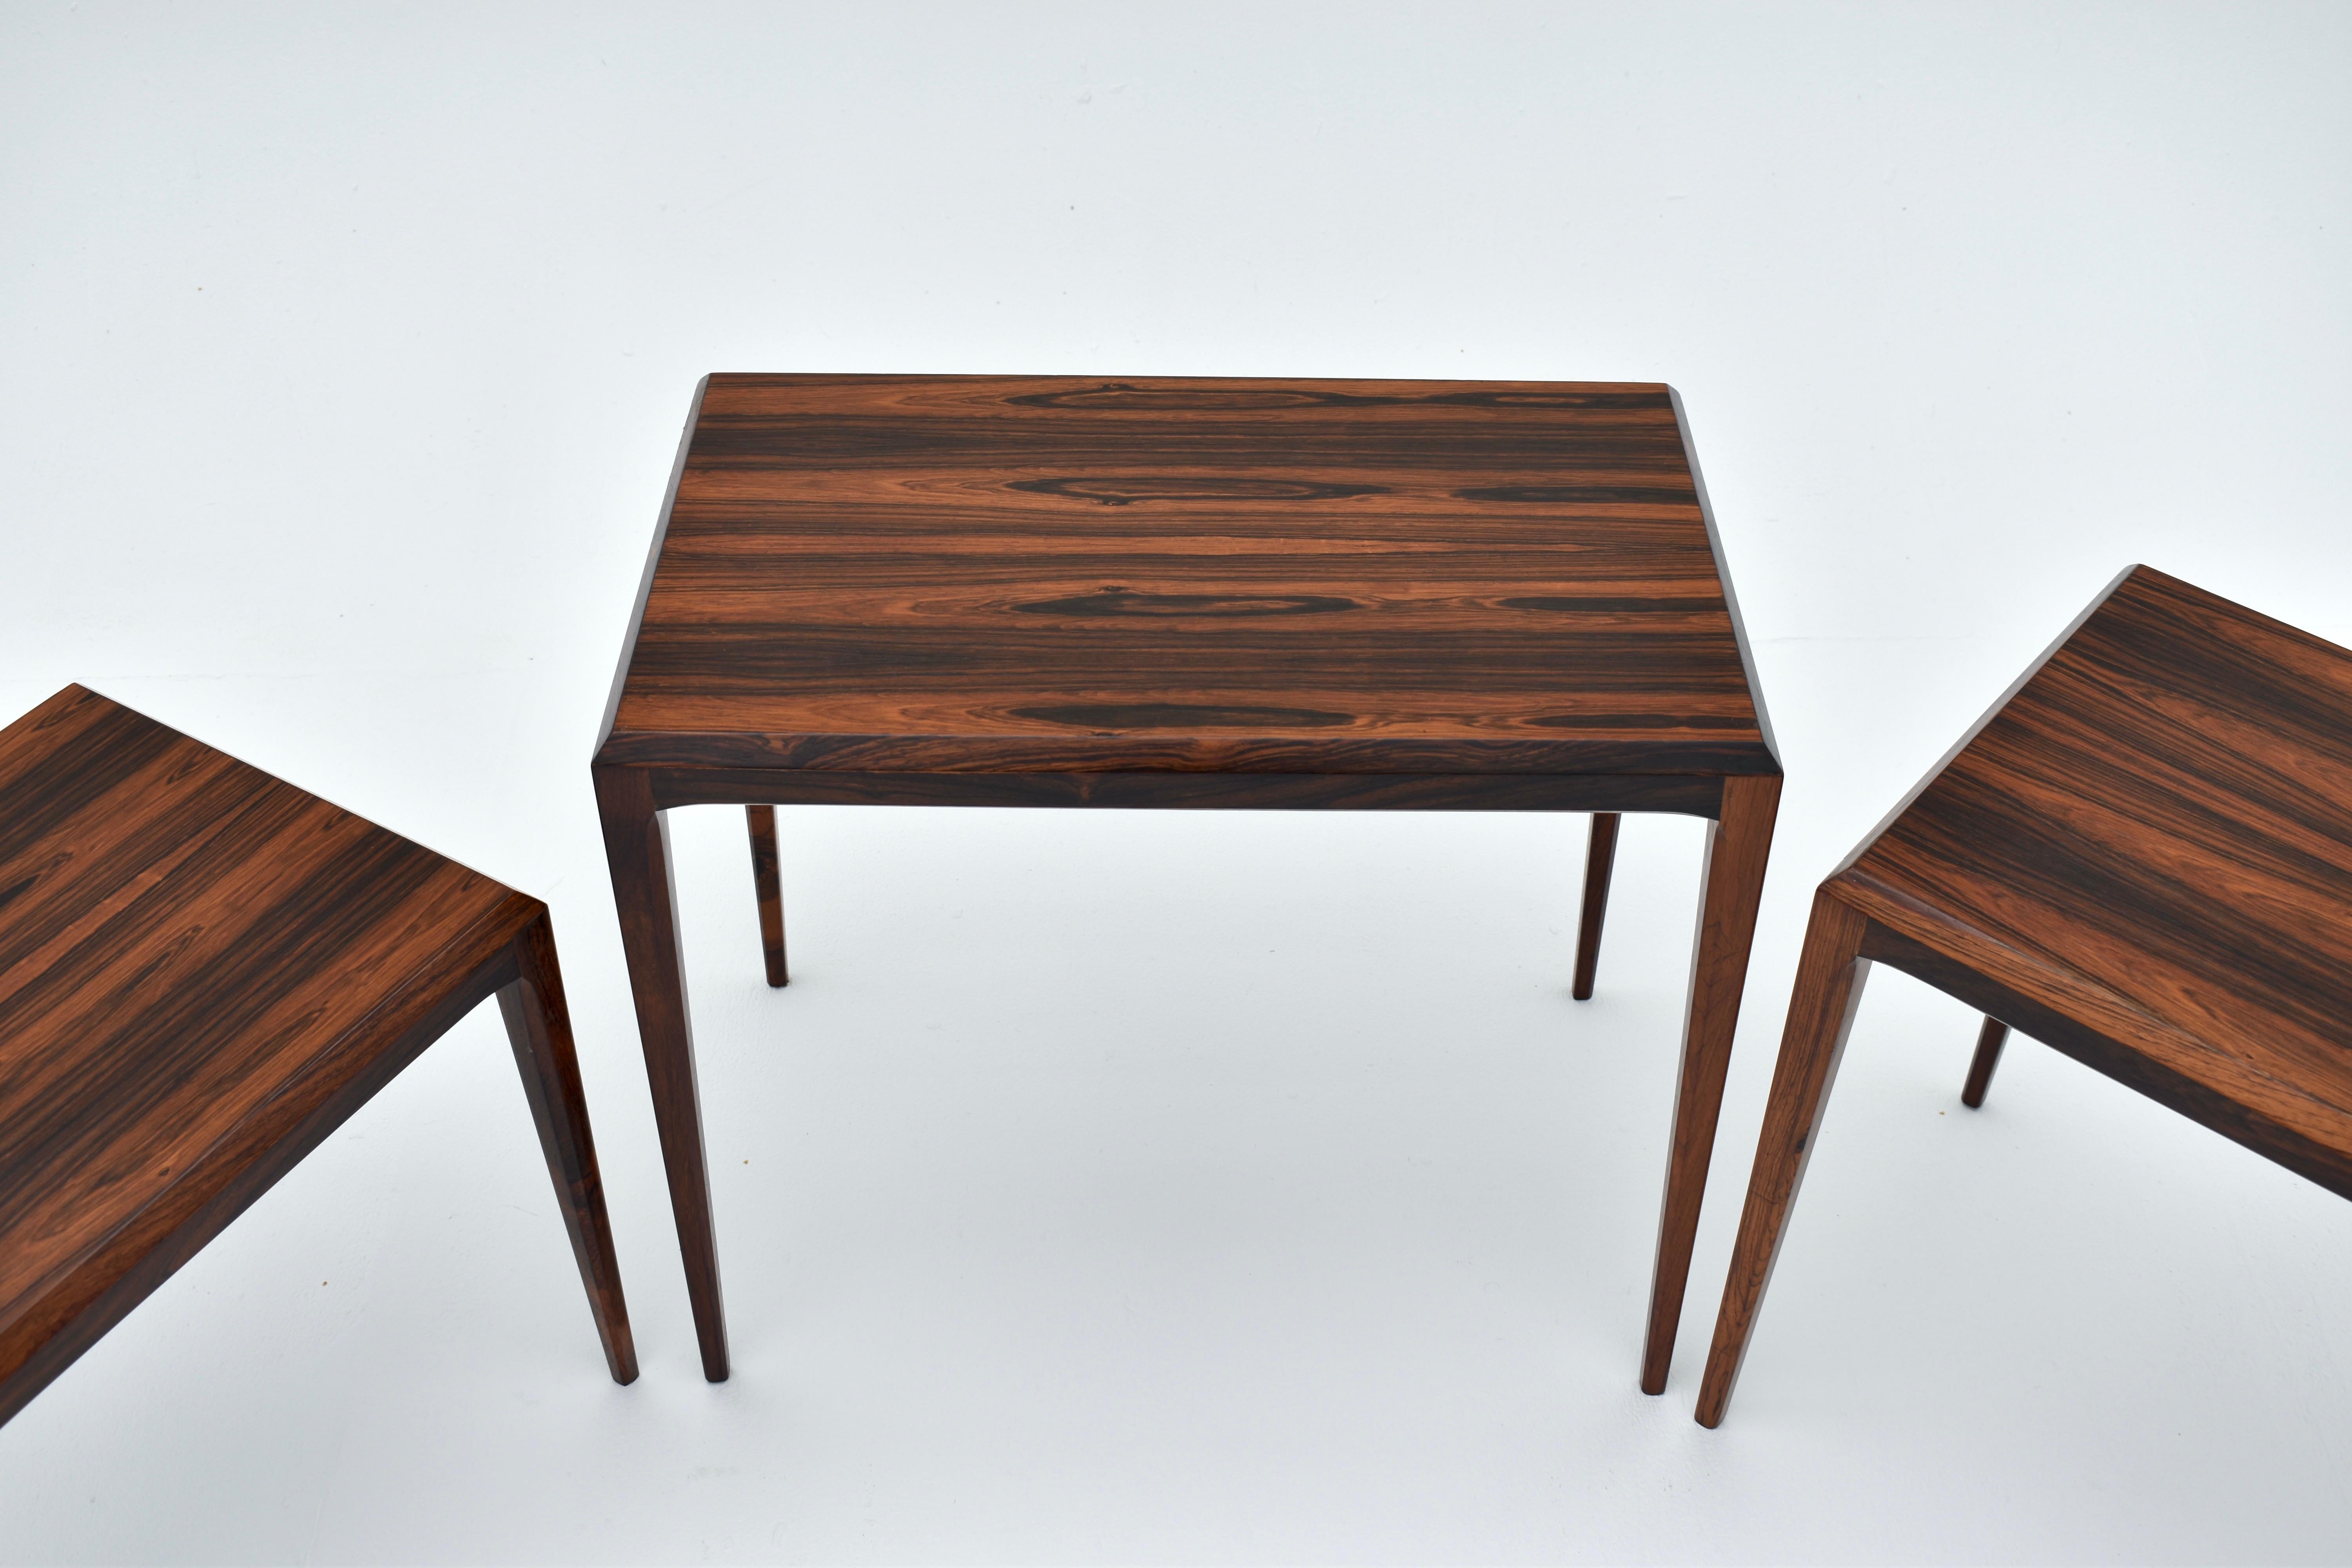 Midcentury Danish Set Of 3 Rosewood Nesting Tables BY Johannes Andersen For CFC In Good Condition For Sale In Shepperton, Surrey